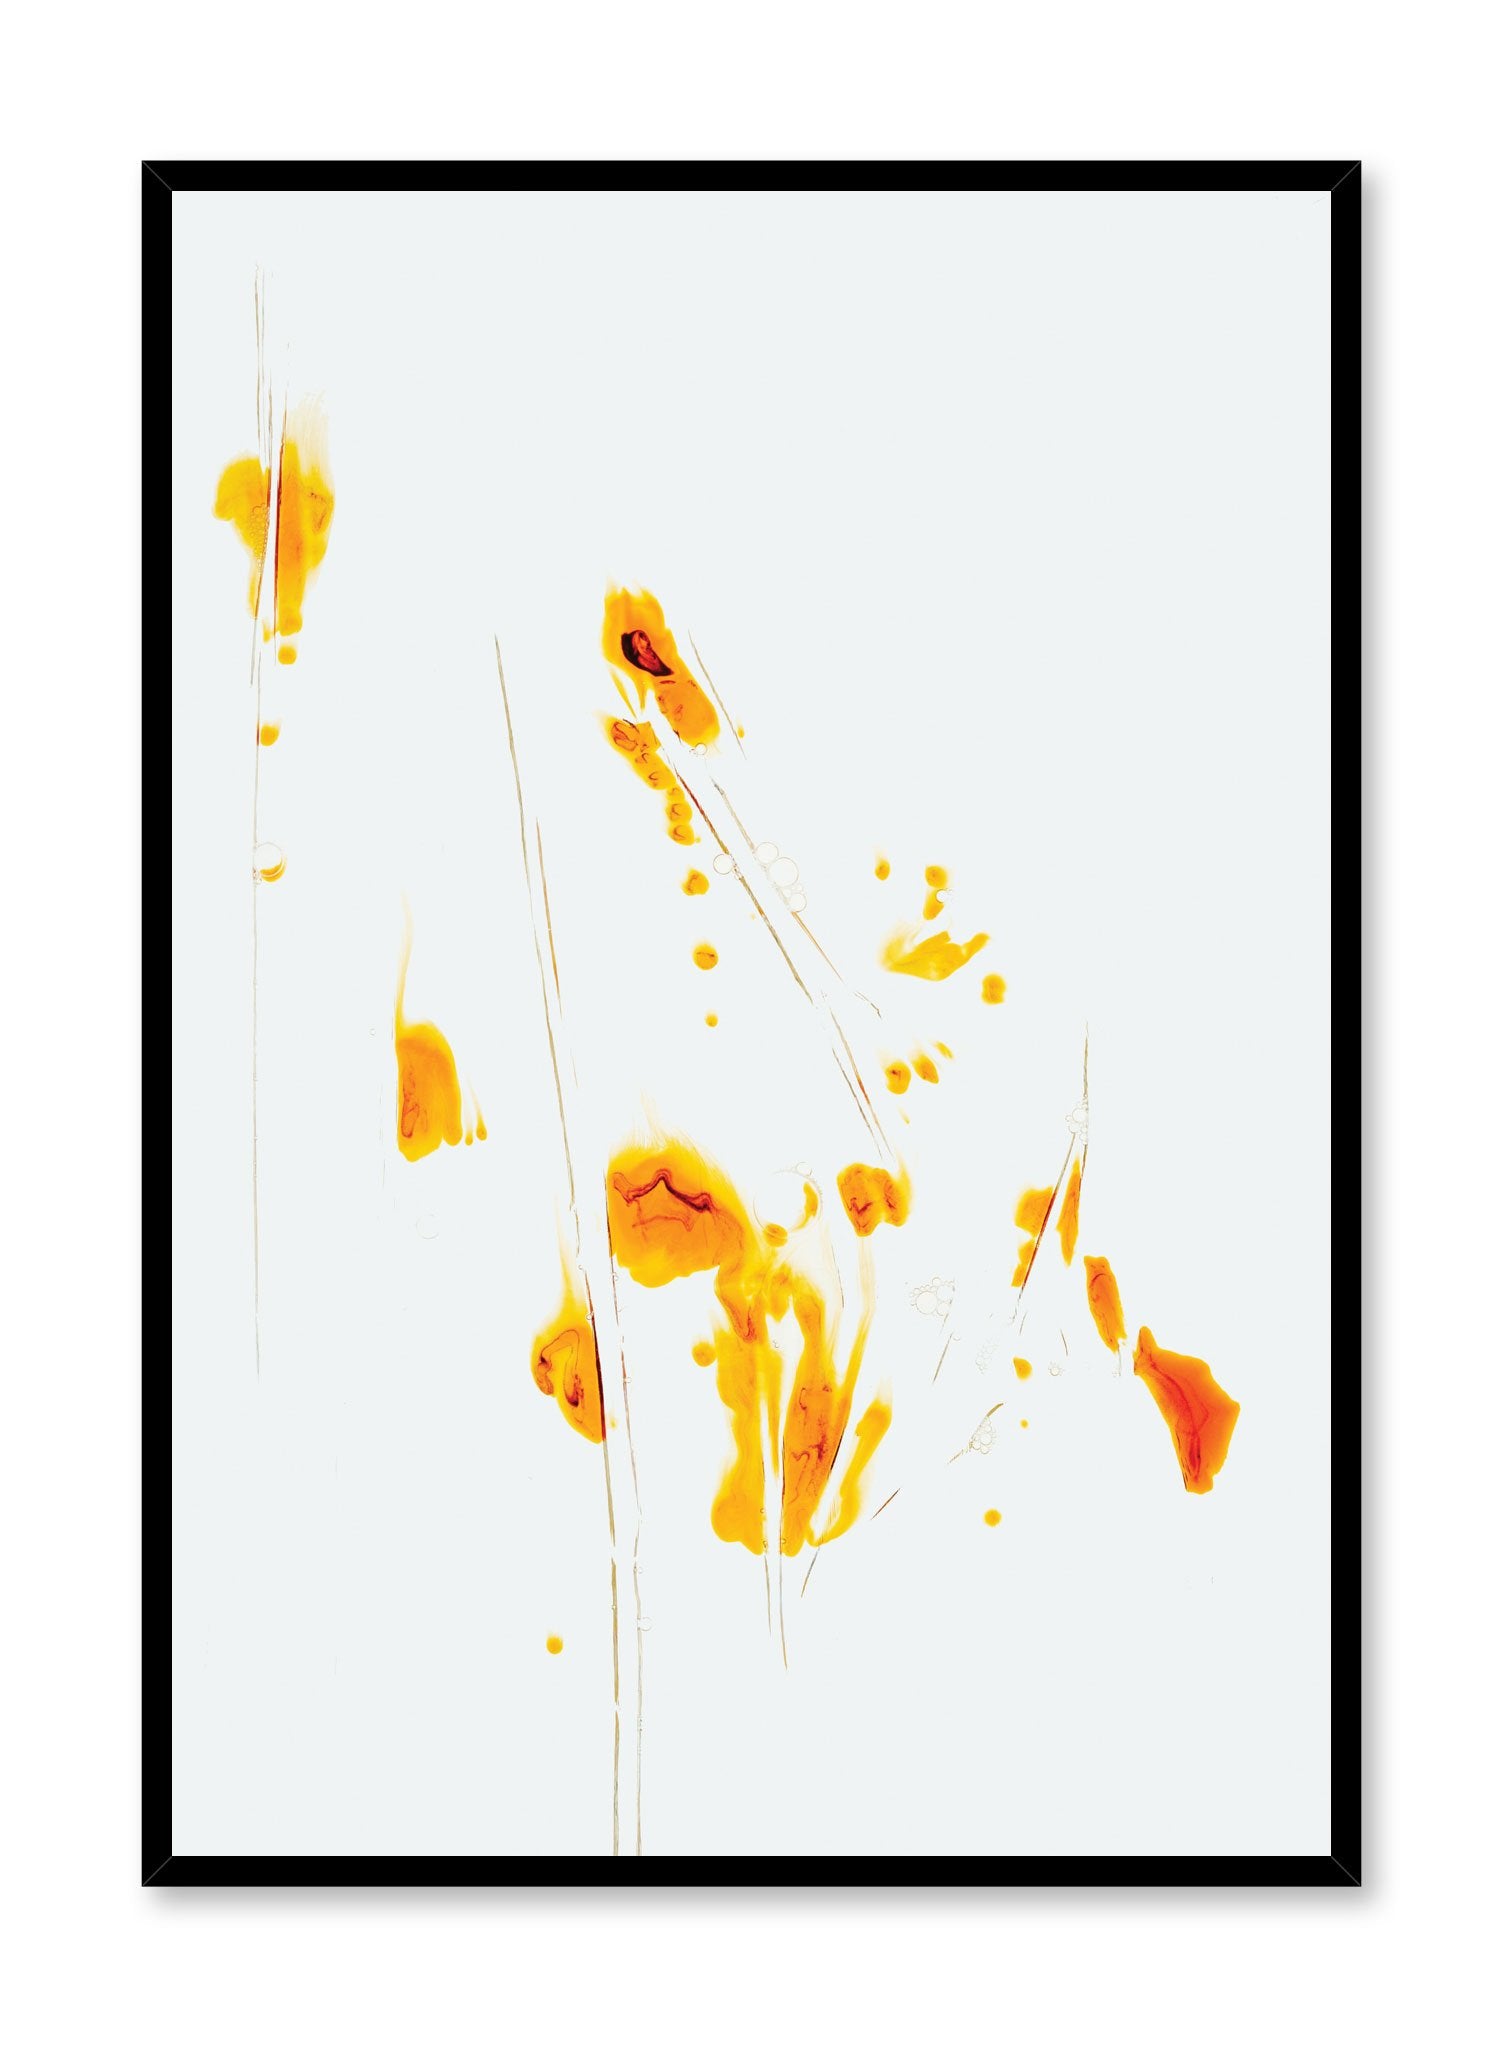 Minimalist design poster by Opposite Wall with abstract orange spots